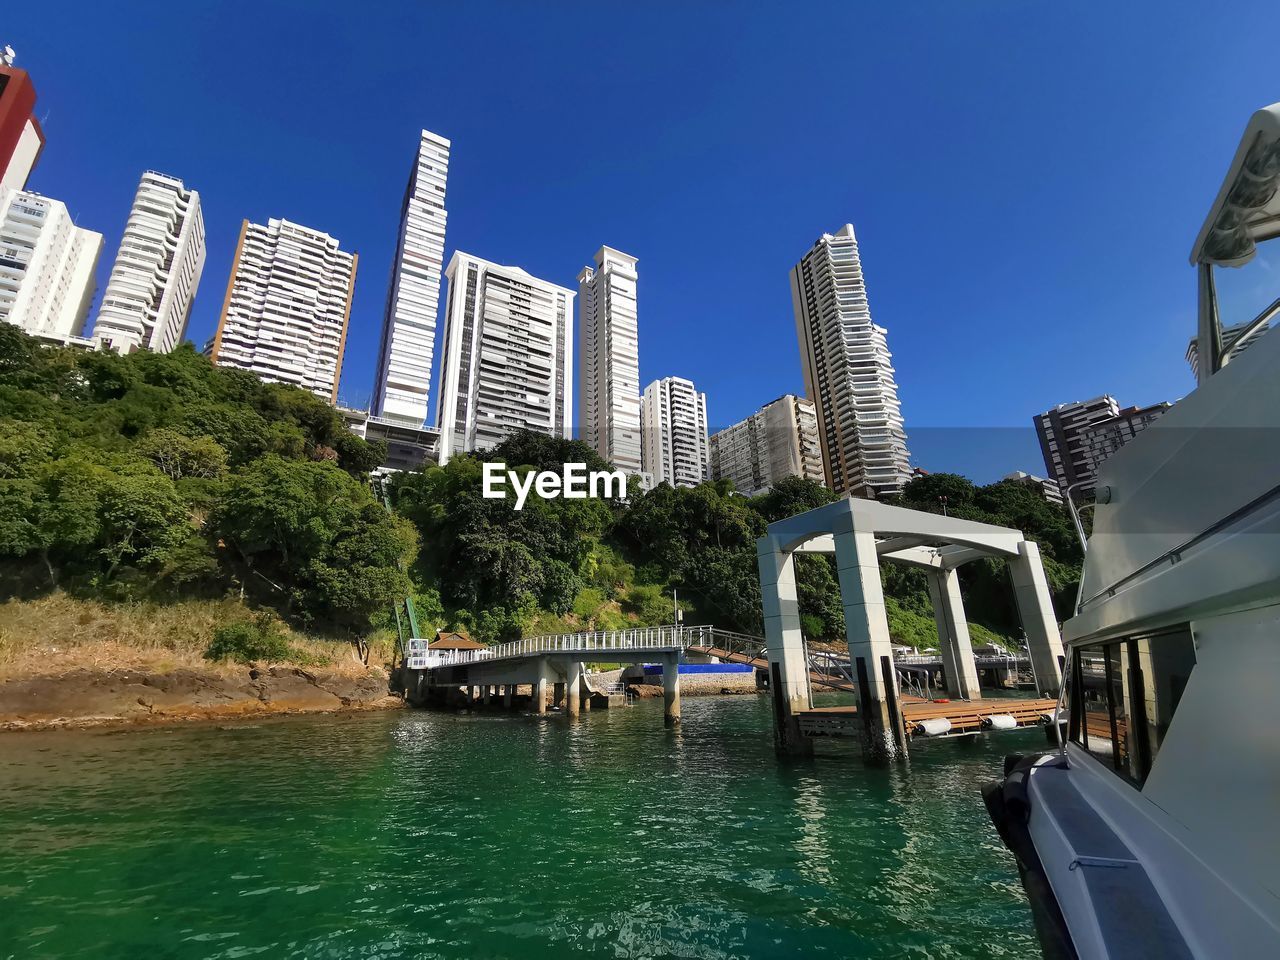 SCENIC VIEW OF RIVER AND BUILDINGS AGAINST SKY